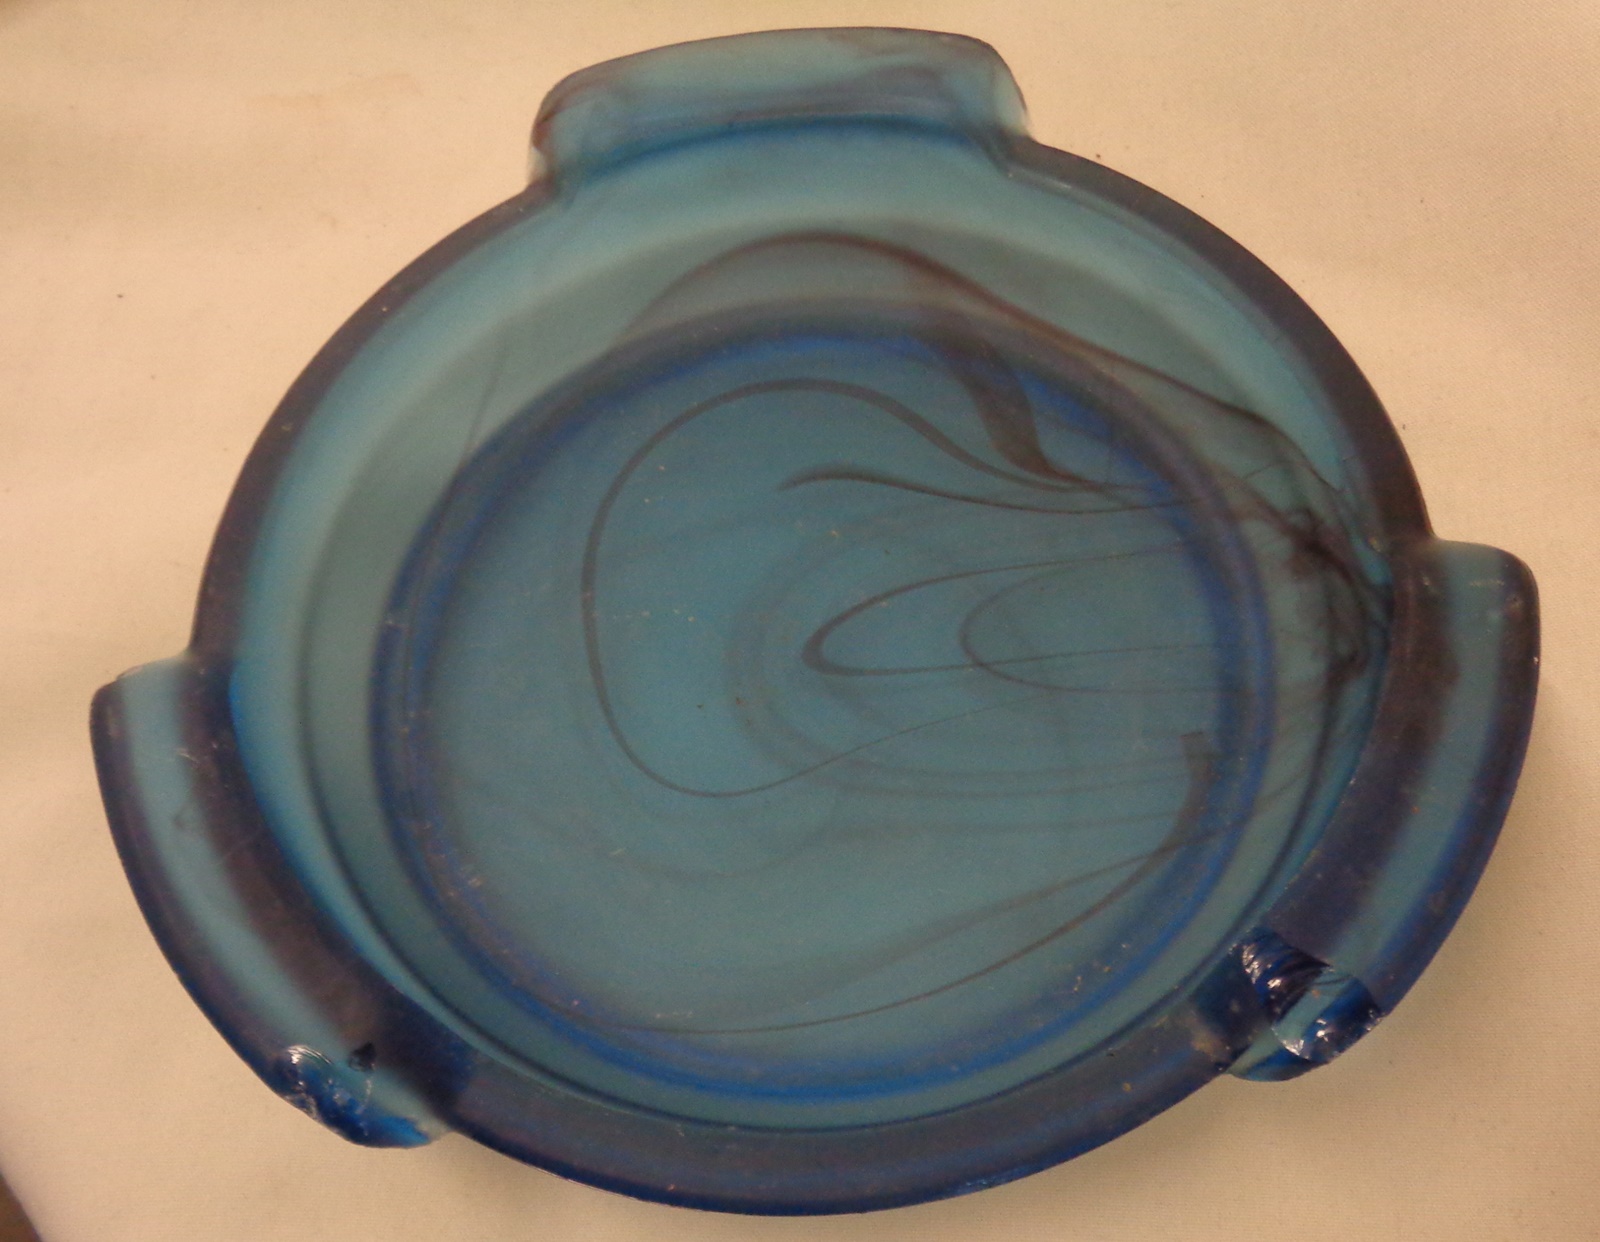 Large Art Deco marbled blue glass flower bowl on stand - Image 2 of 2